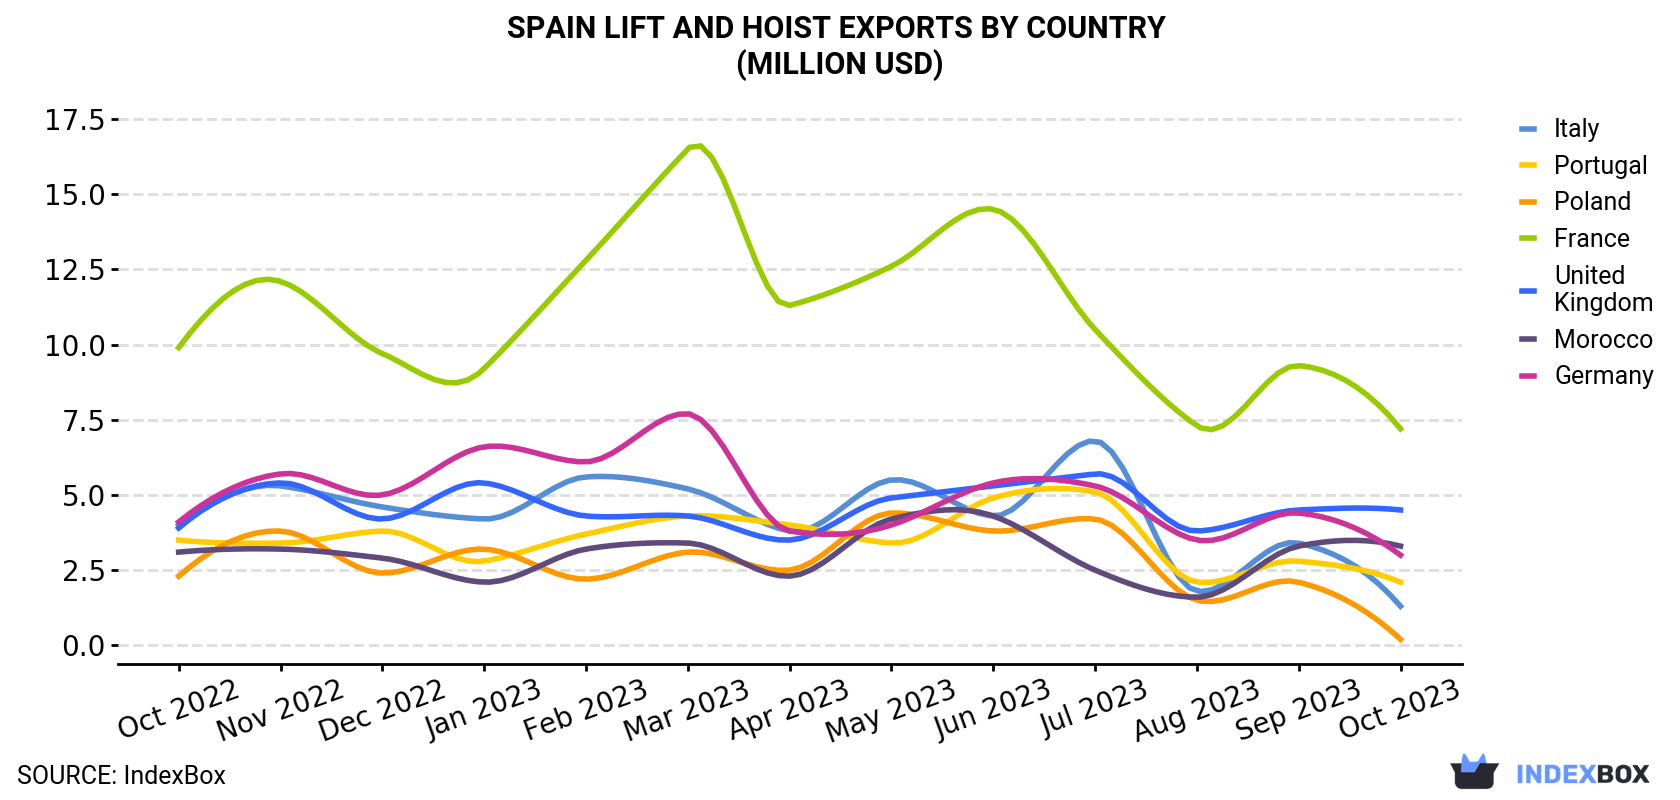 Spain Lift And Hoist Exports By Country (Million USD)